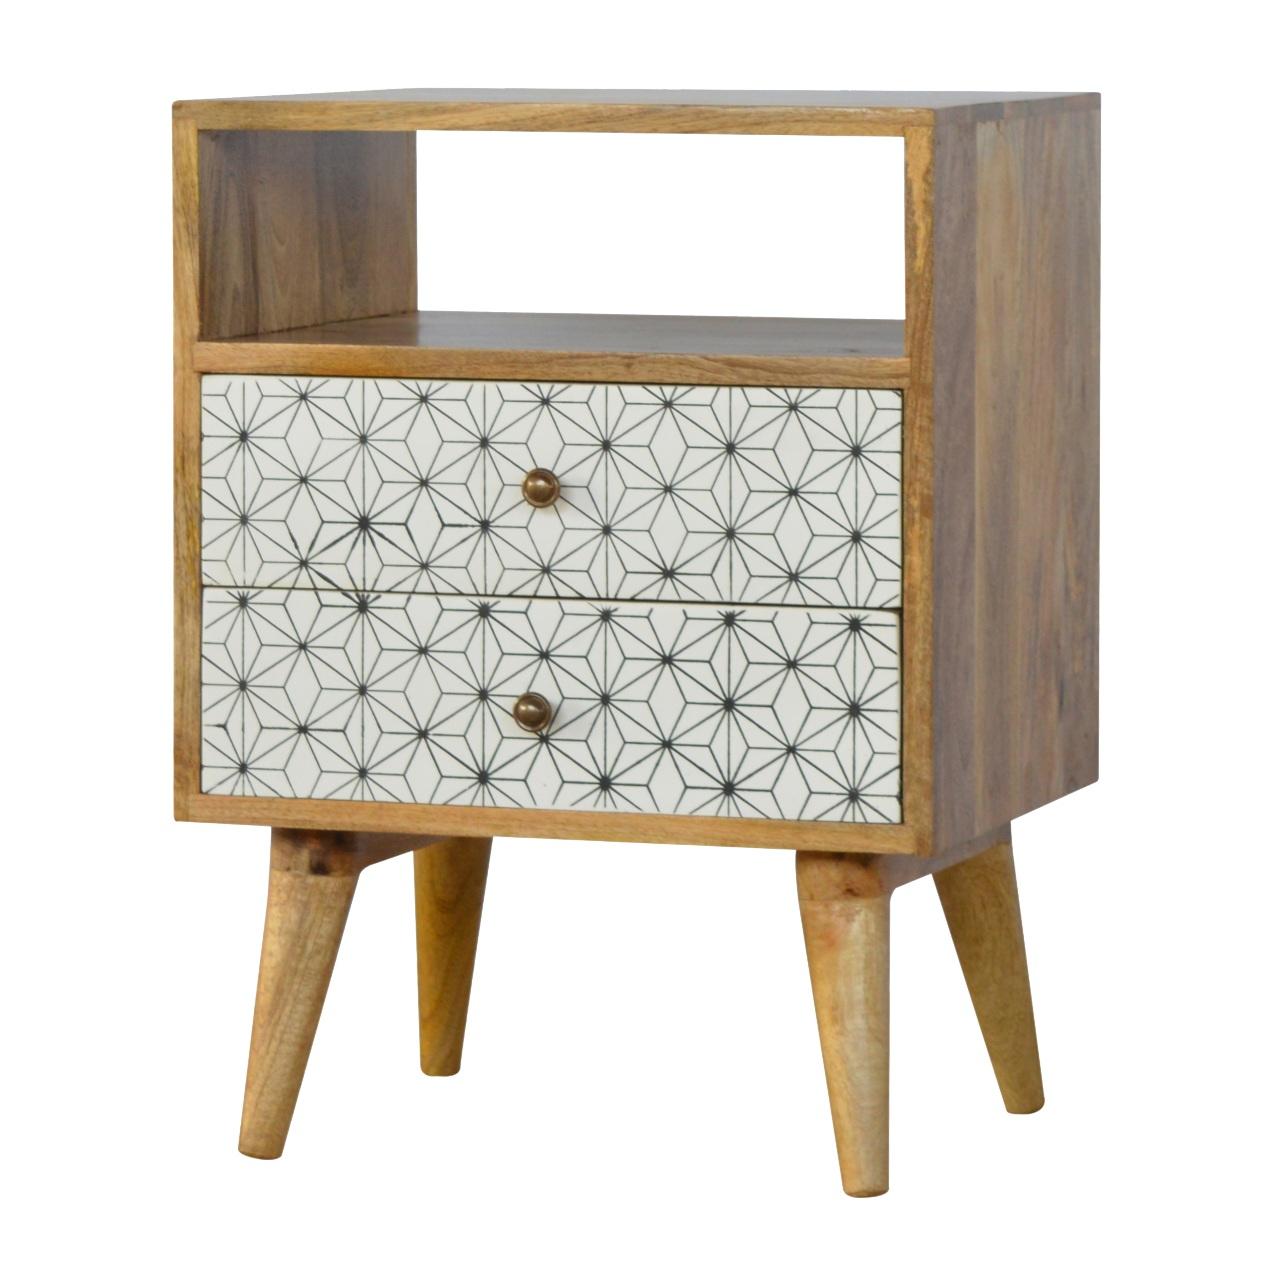 Geometric Screen Printed Bedside With Open Slot